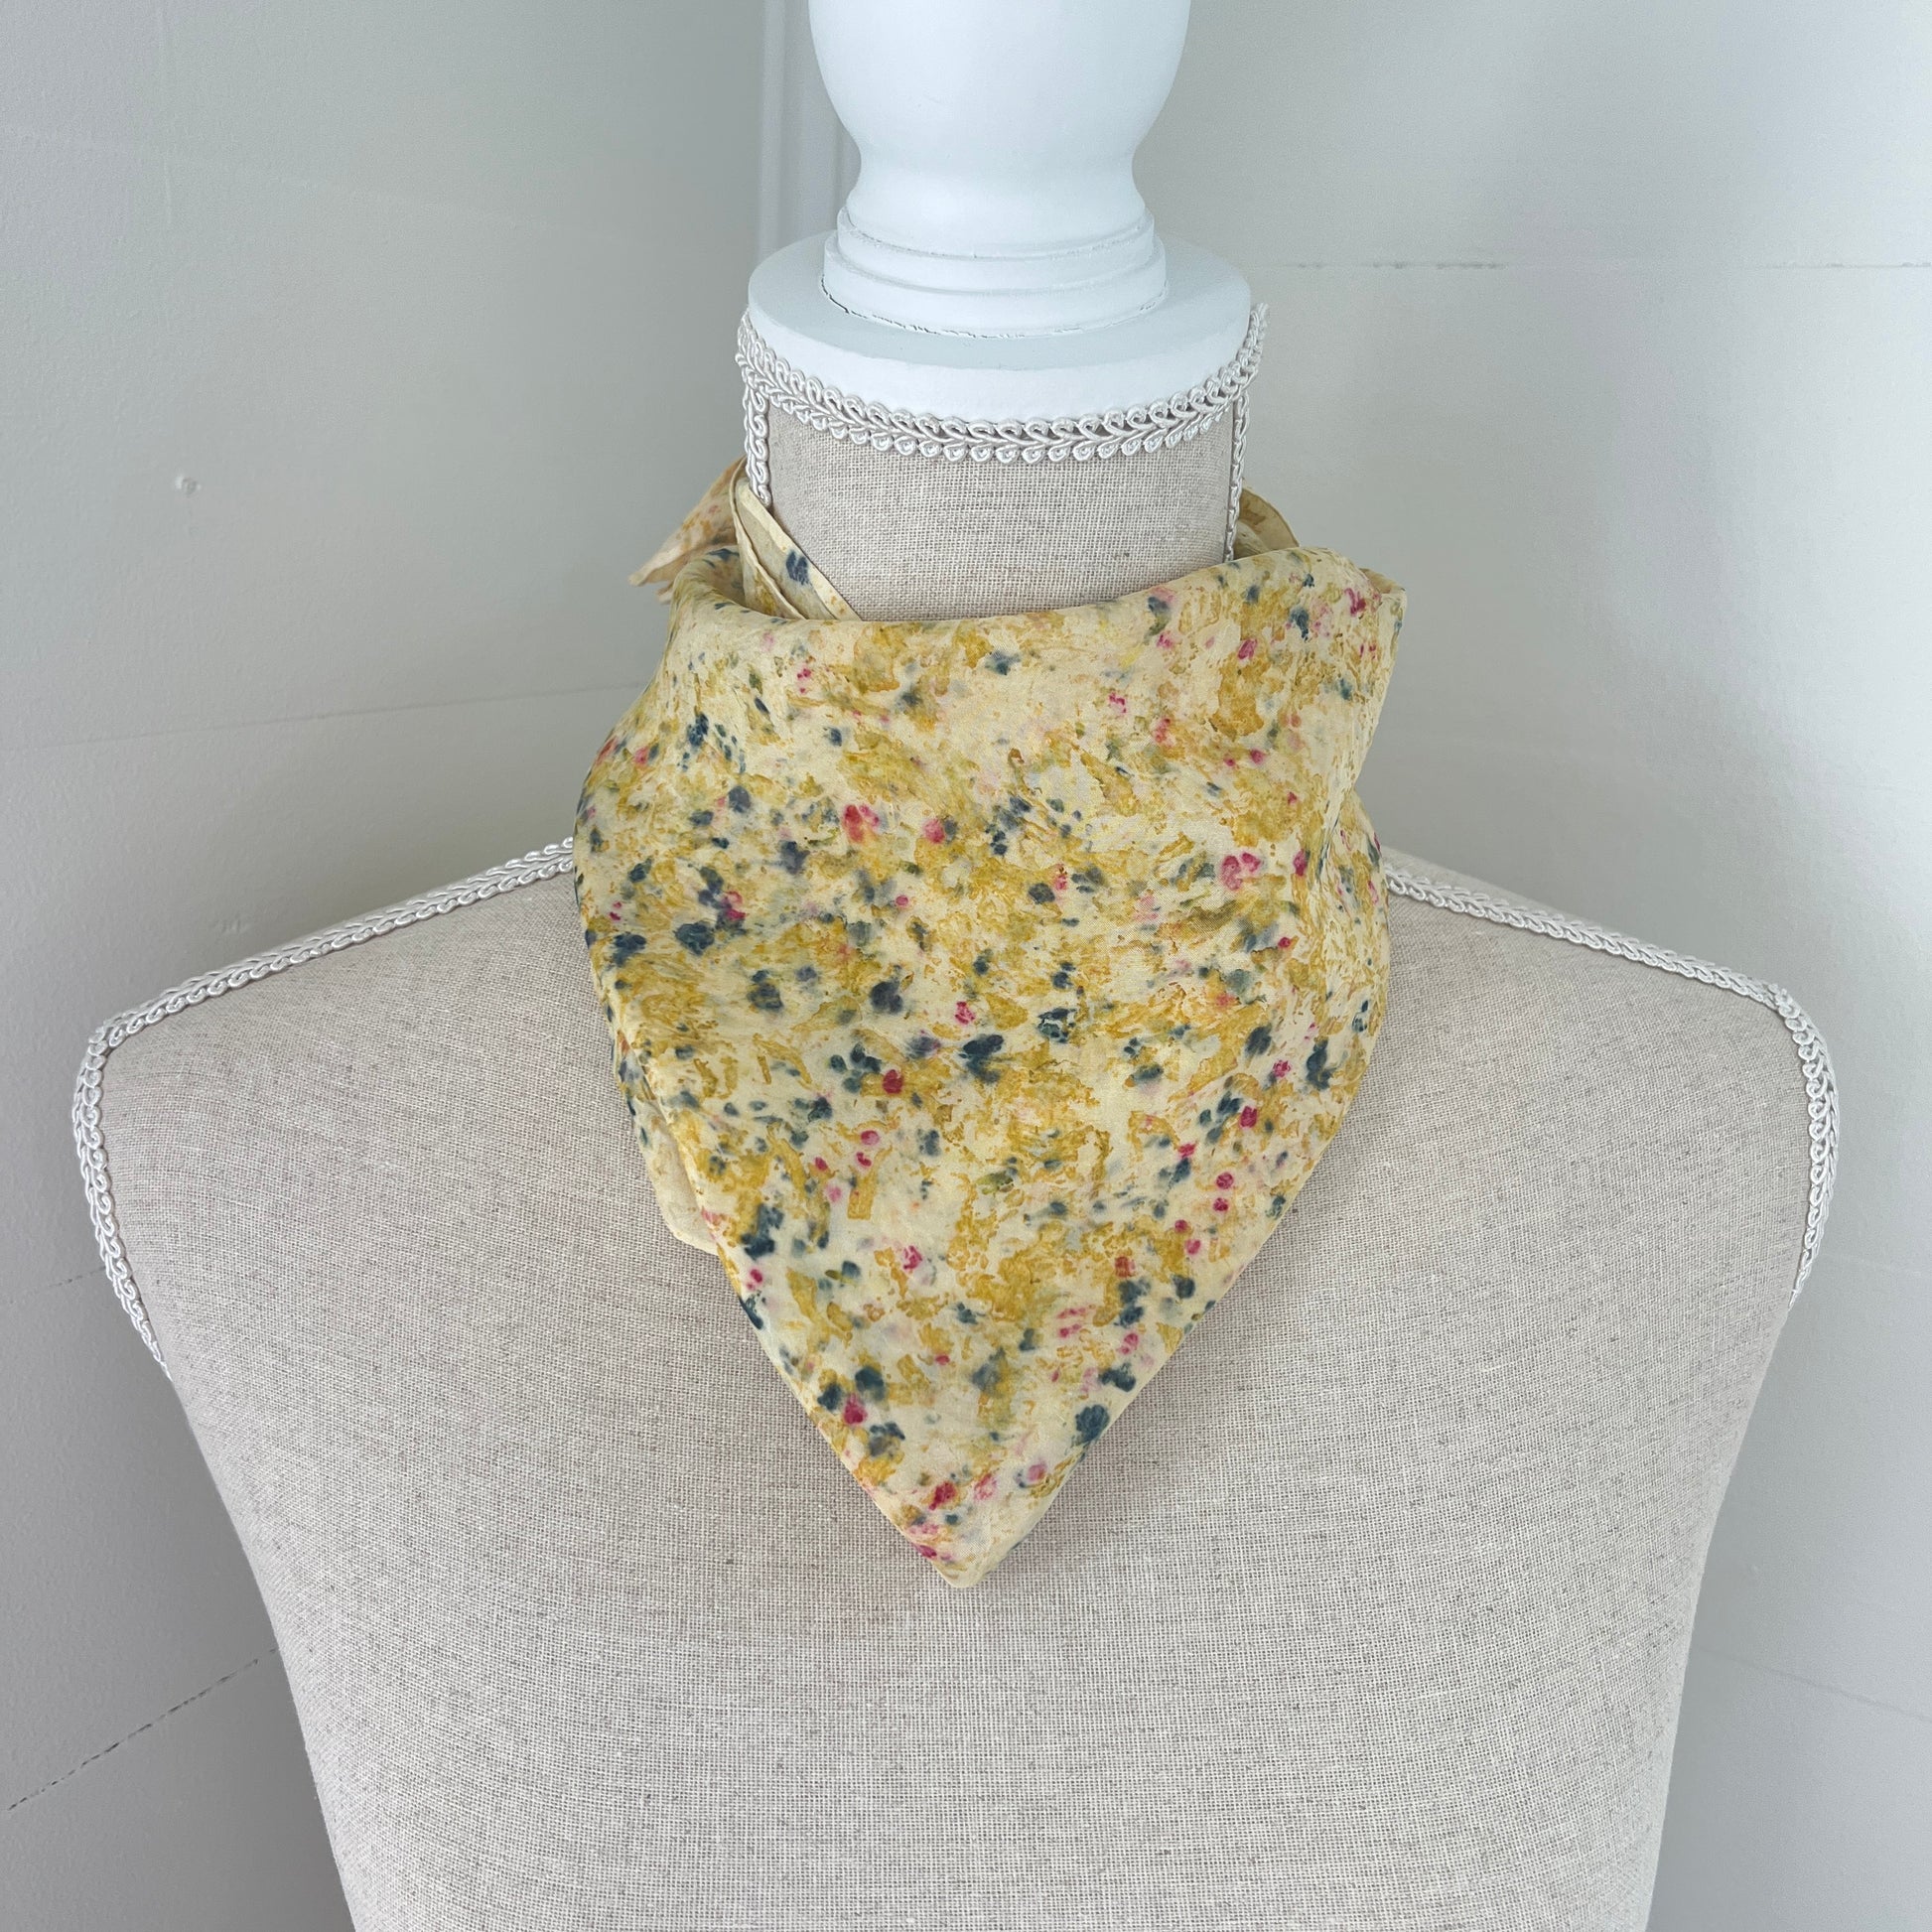 "Juniper" Marigold/Bachelor Buttons/Hint of Cochineal Scarf 1818 Farms   